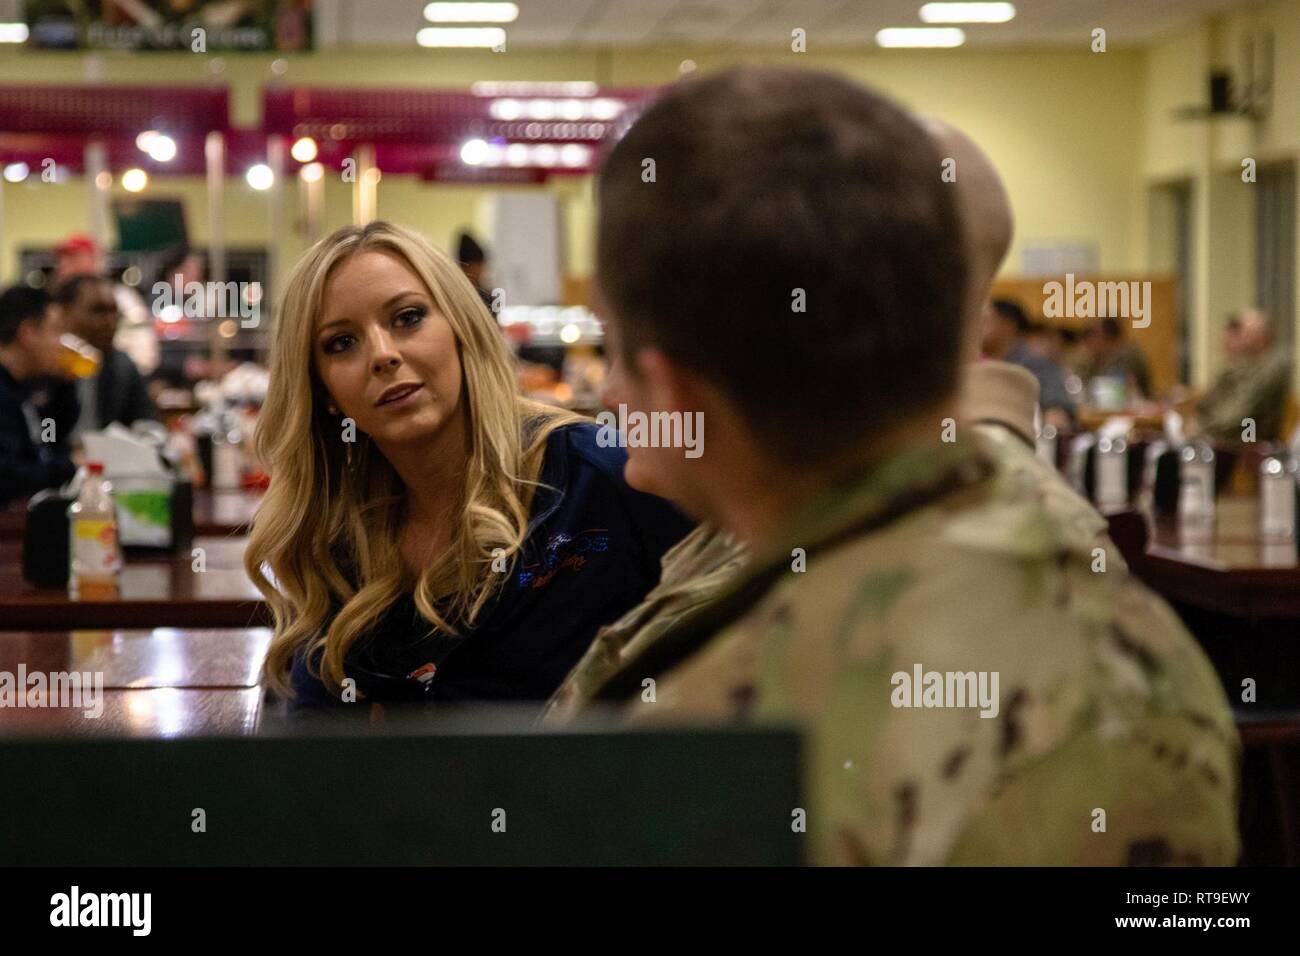 Haley, a Denver Broncos cheerleader, talks with Soldiers from the 4th Combat Aviation Brigade, 4th Infantry Division, in the Flight Line Cafe Dining Facility as part of the Denver Broncos Pro Blitz Tour sponsored by Armed Forces Entertainment in Illesheim, Germany, Jan. 28, 2019.    The Denver Broncos Pro Blitz Tour featuring the Denver Broncos Cheerleaders, Miles the team mascot and former players, is orchestrated by Armed Forces Entertainment in order to provide the best unique entertainment to U.S. troops and family members stationed overseas. Stock Photo